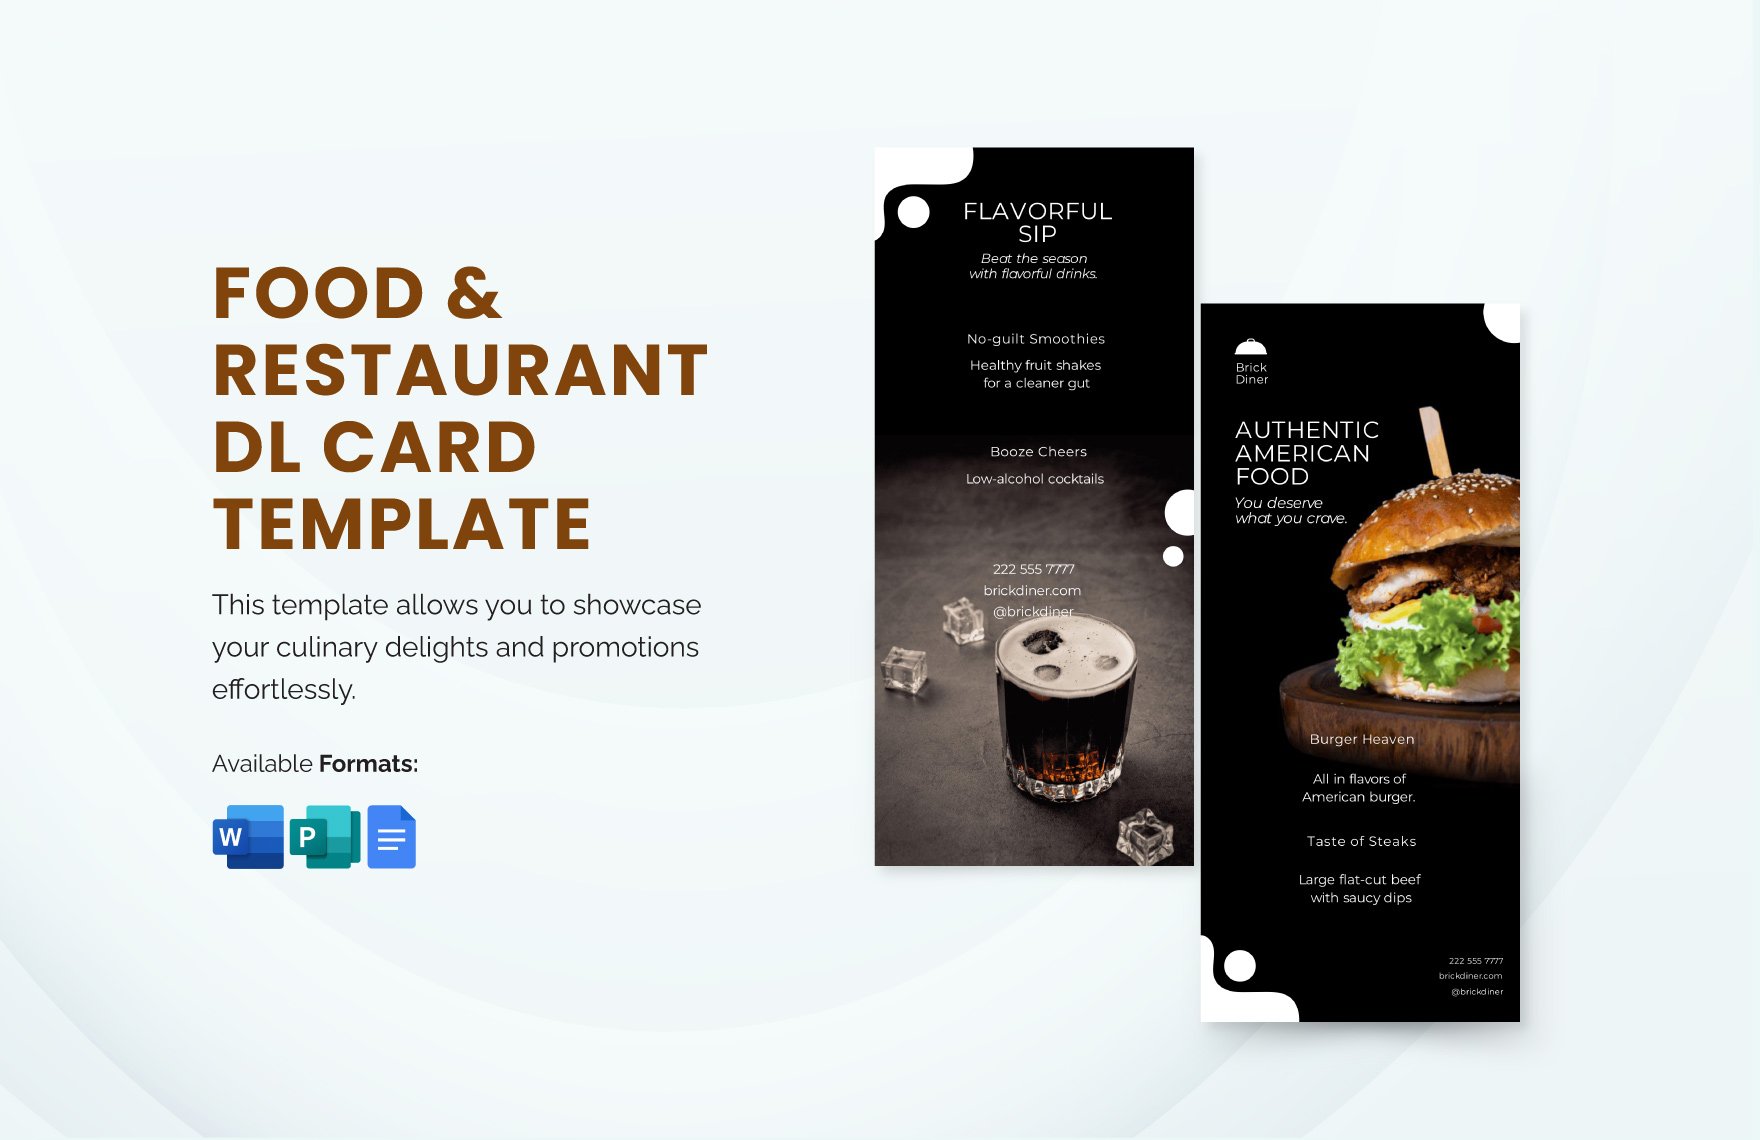 Food & Restaurant DL Card Template in Word, Google Docs, Publisher